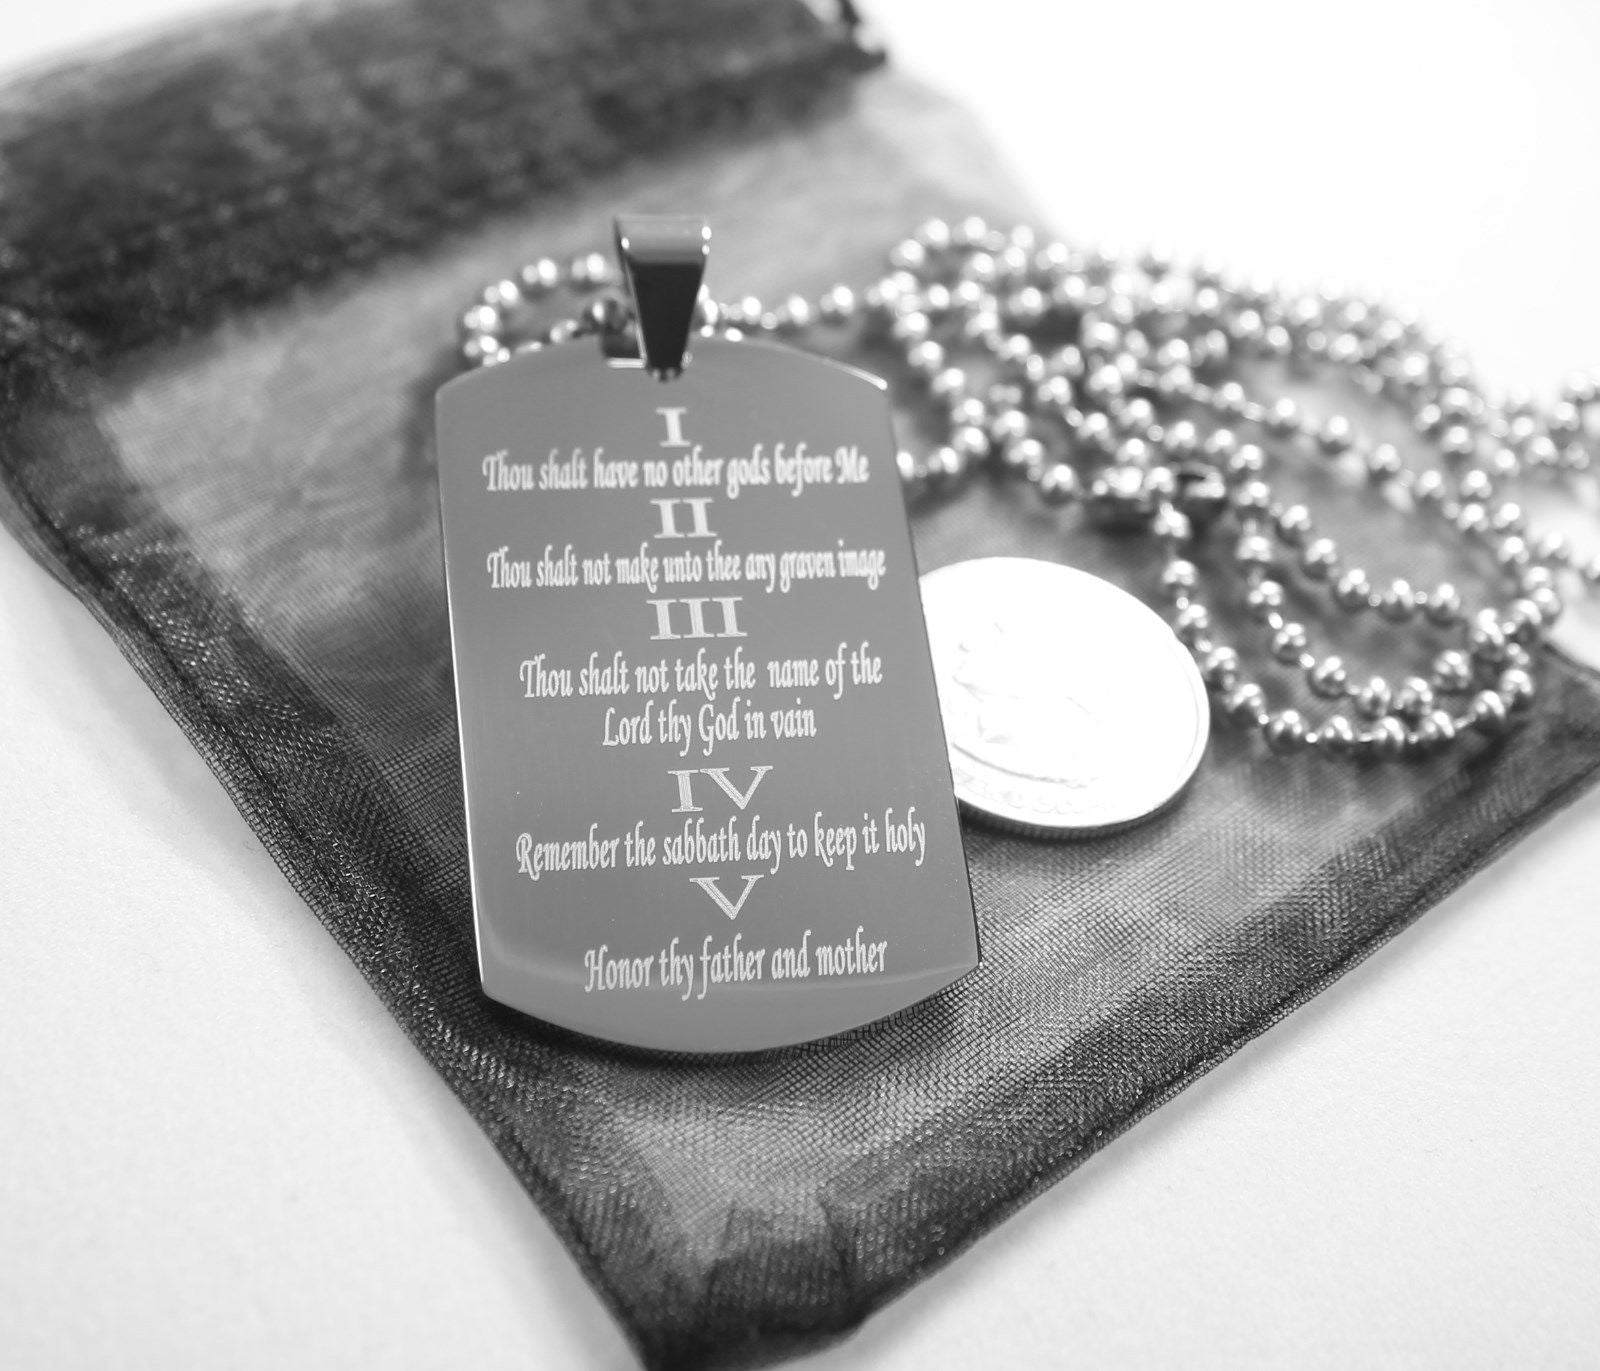 10 COMMANDMENTS SOLID THICK  STAINLESS STEEL BALL CHAIN SHINE PRAYER NECKLACE - Samstagsandmore